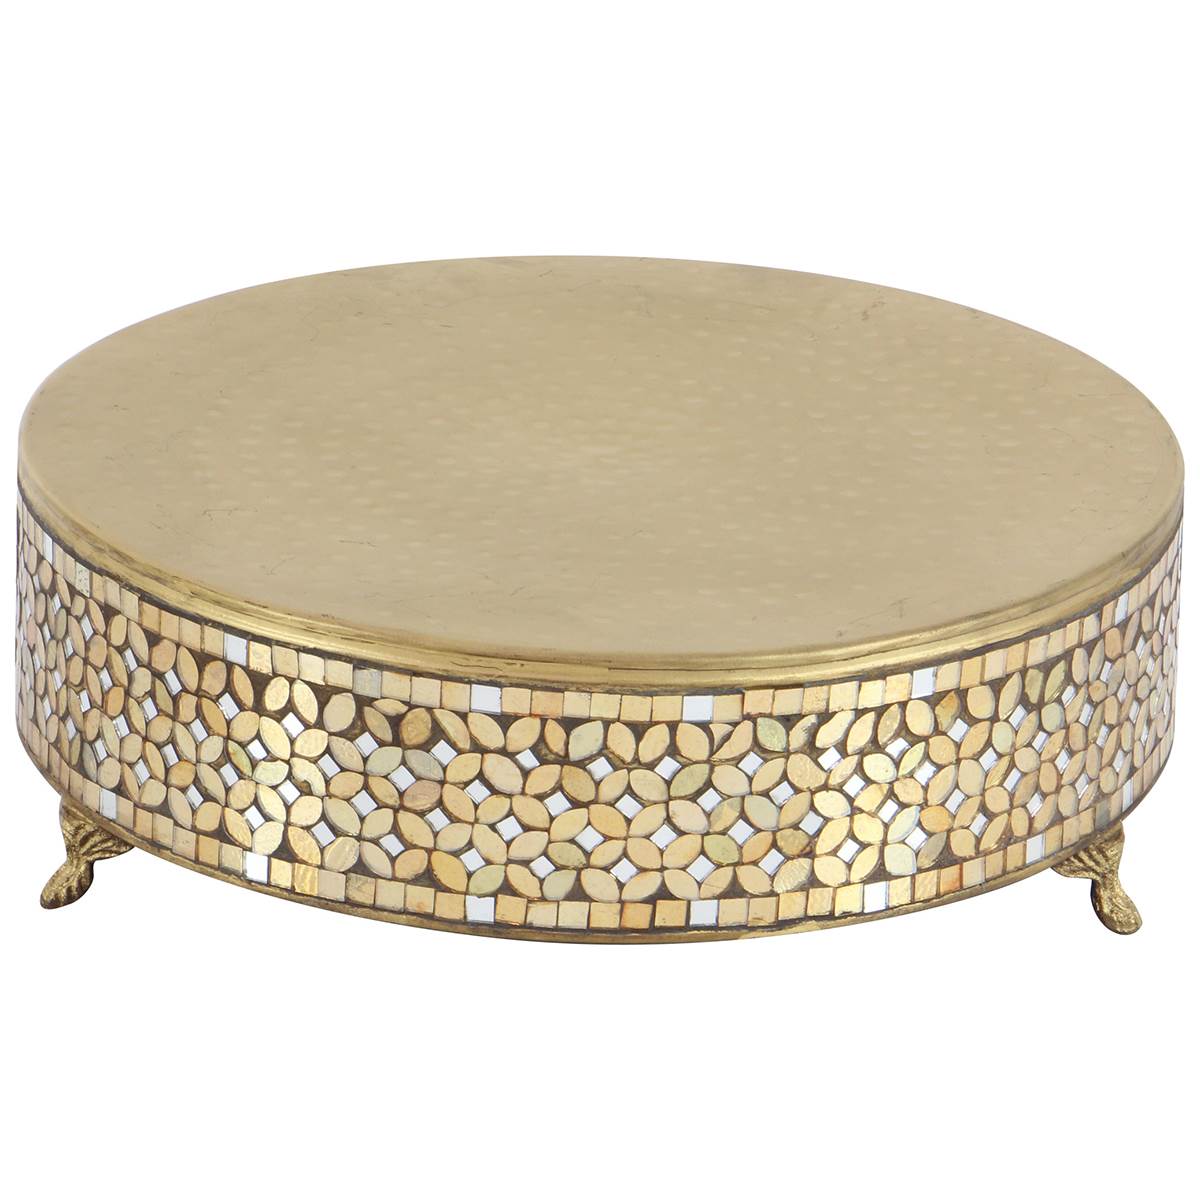 9th & Pike(R) Metal & Glass Mosaic Tiered Cake Stand